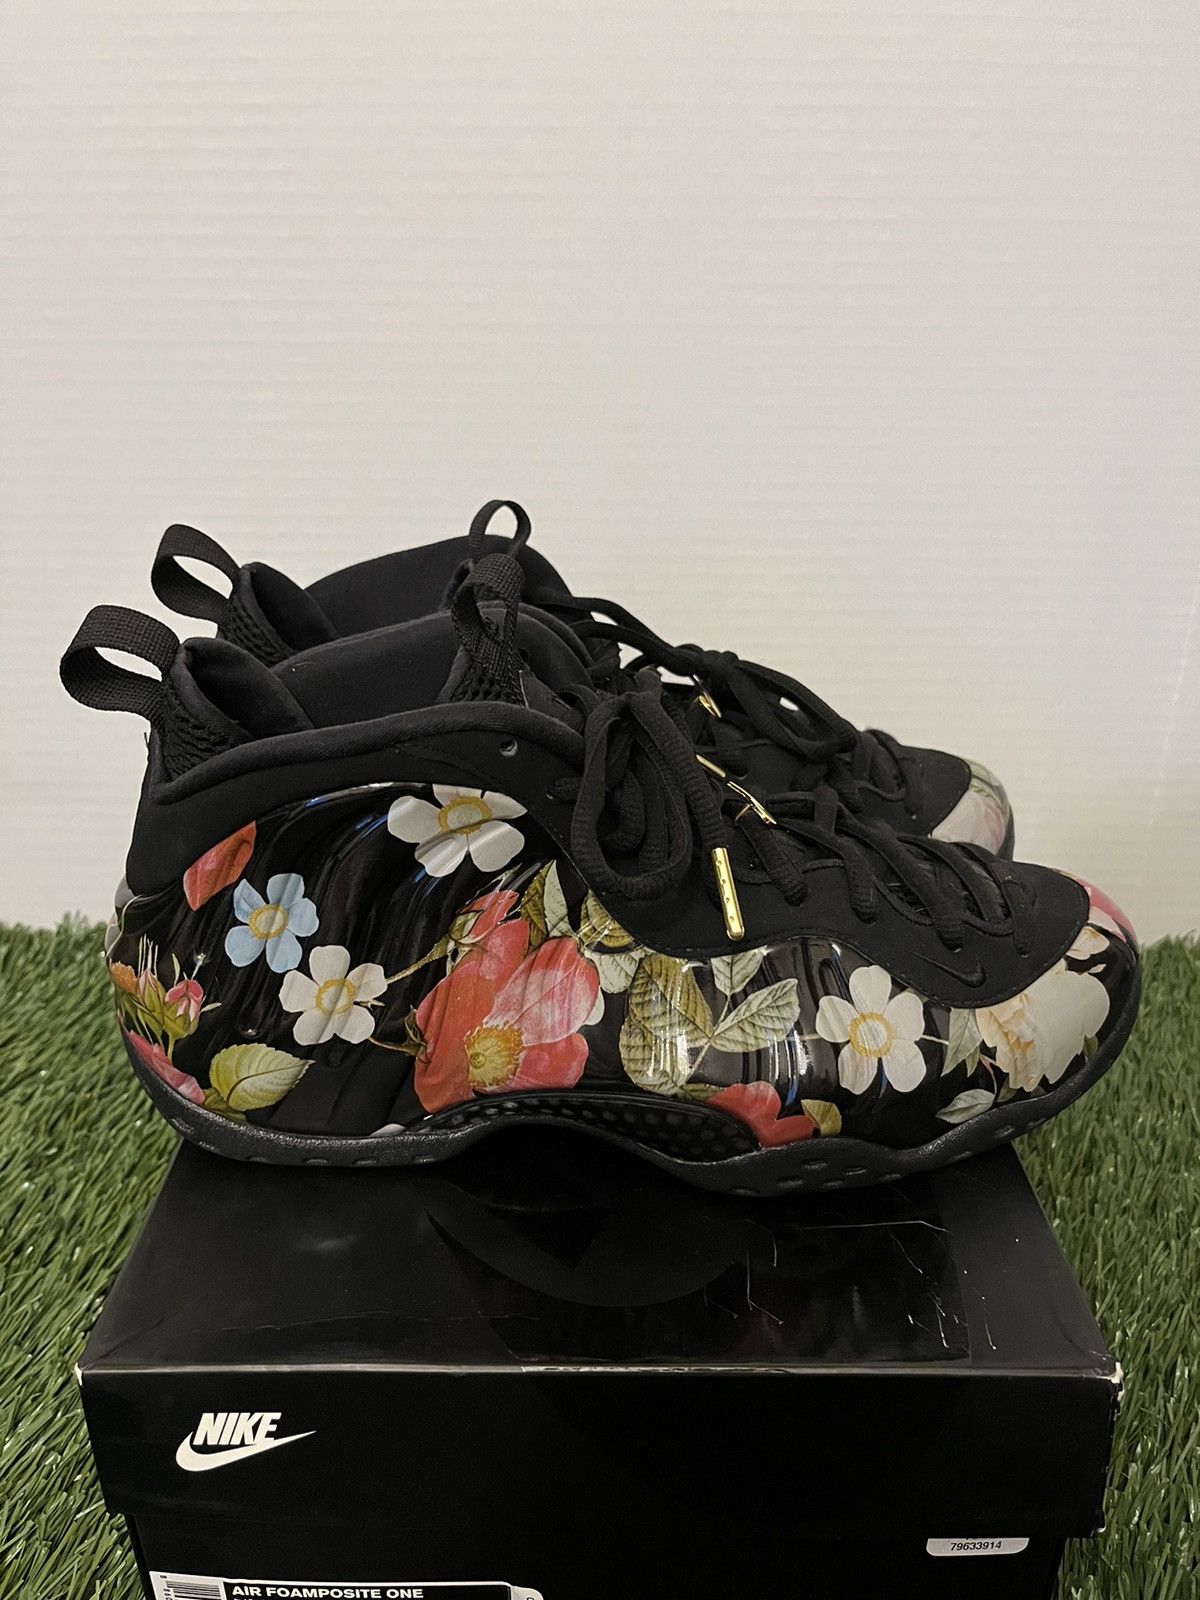 Nike Nike Air Foamposite One ‘Floral’ Size 10 Size US 10 / EU 43 - 2 Preview